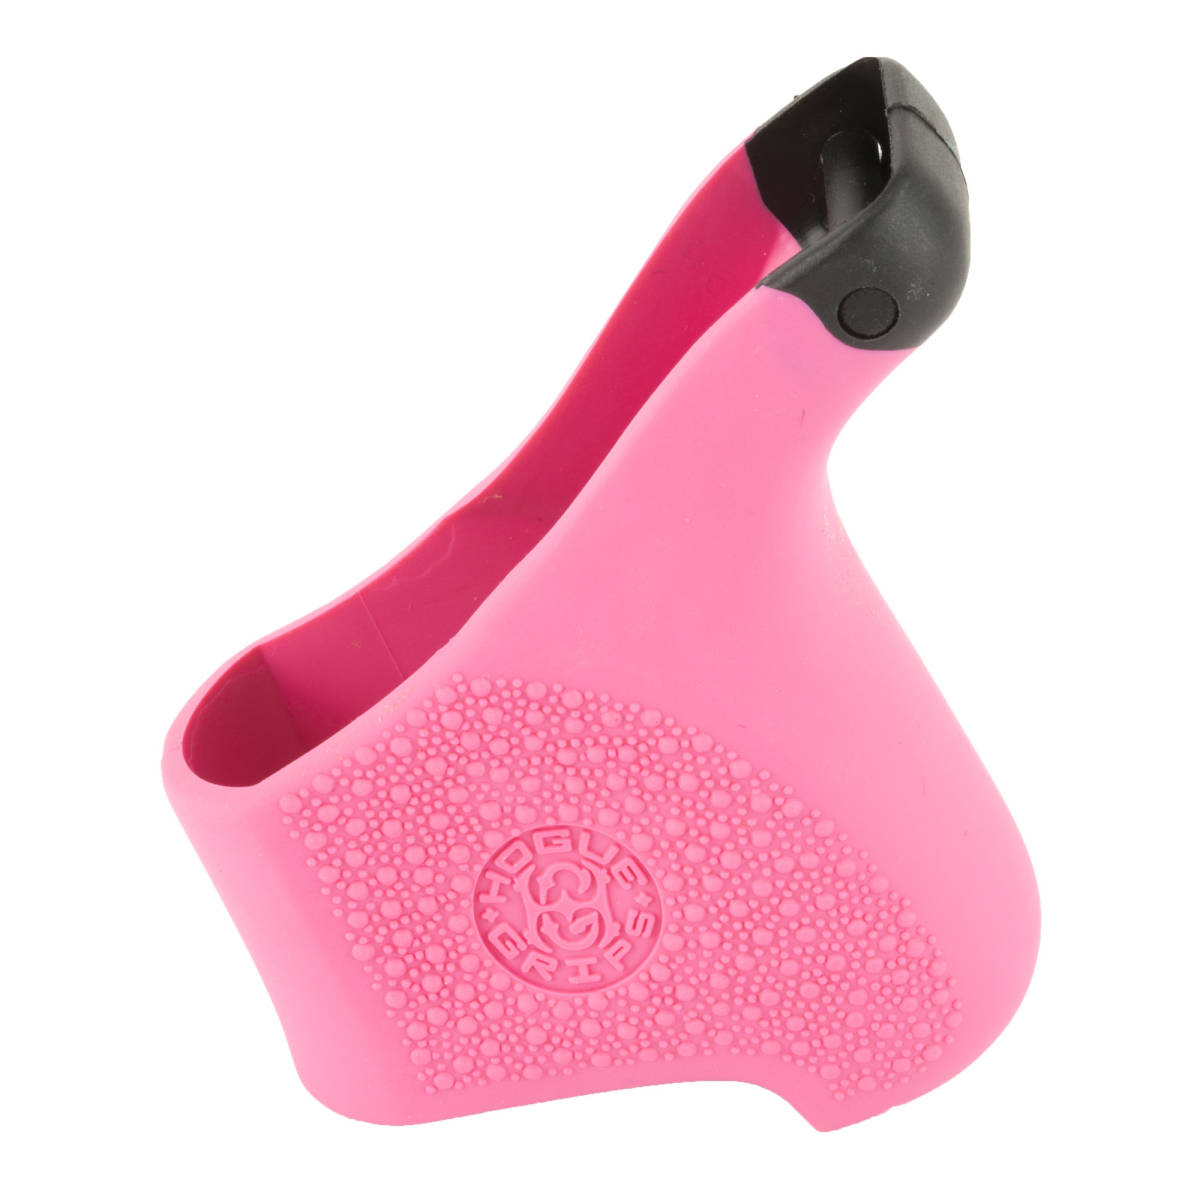 Hogue 18107 HandAll Hybrid Grip Sleeve made of Rubber with Textured Pink-img-1